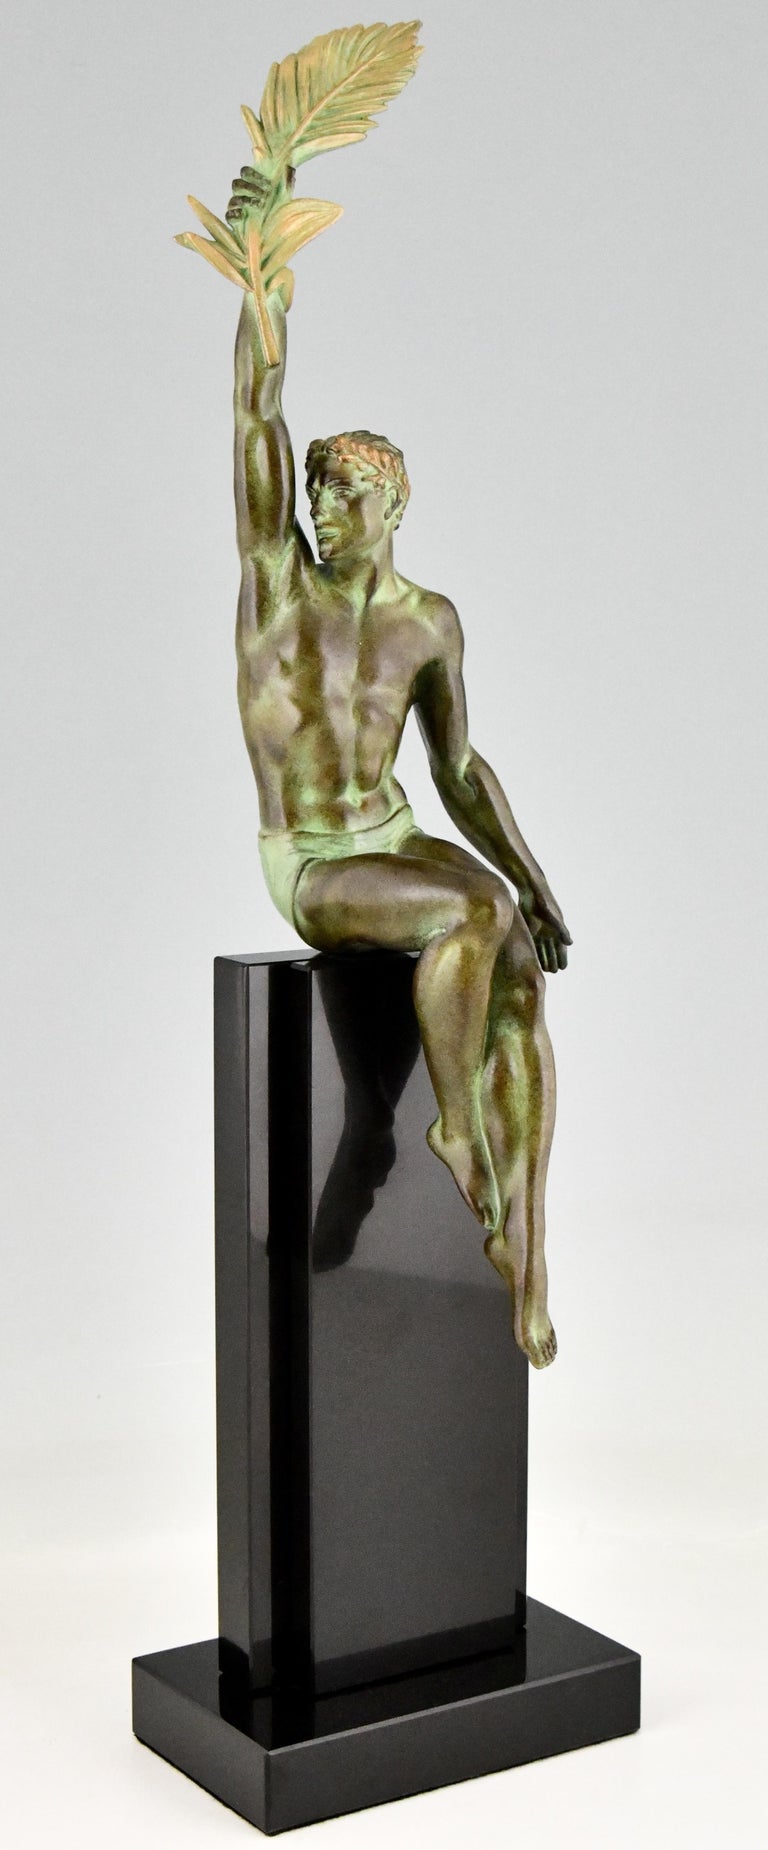 Victory, Art Deco sculpture designed by Pierre Le Faguays ca. 1930. 
Seated man holding a palm leaf. 
Patinated Art metal on a black marble base. 
Contemporary cast at the Max Le Verrier foundry in Paris. 
With foundry seal. 

Literature:
